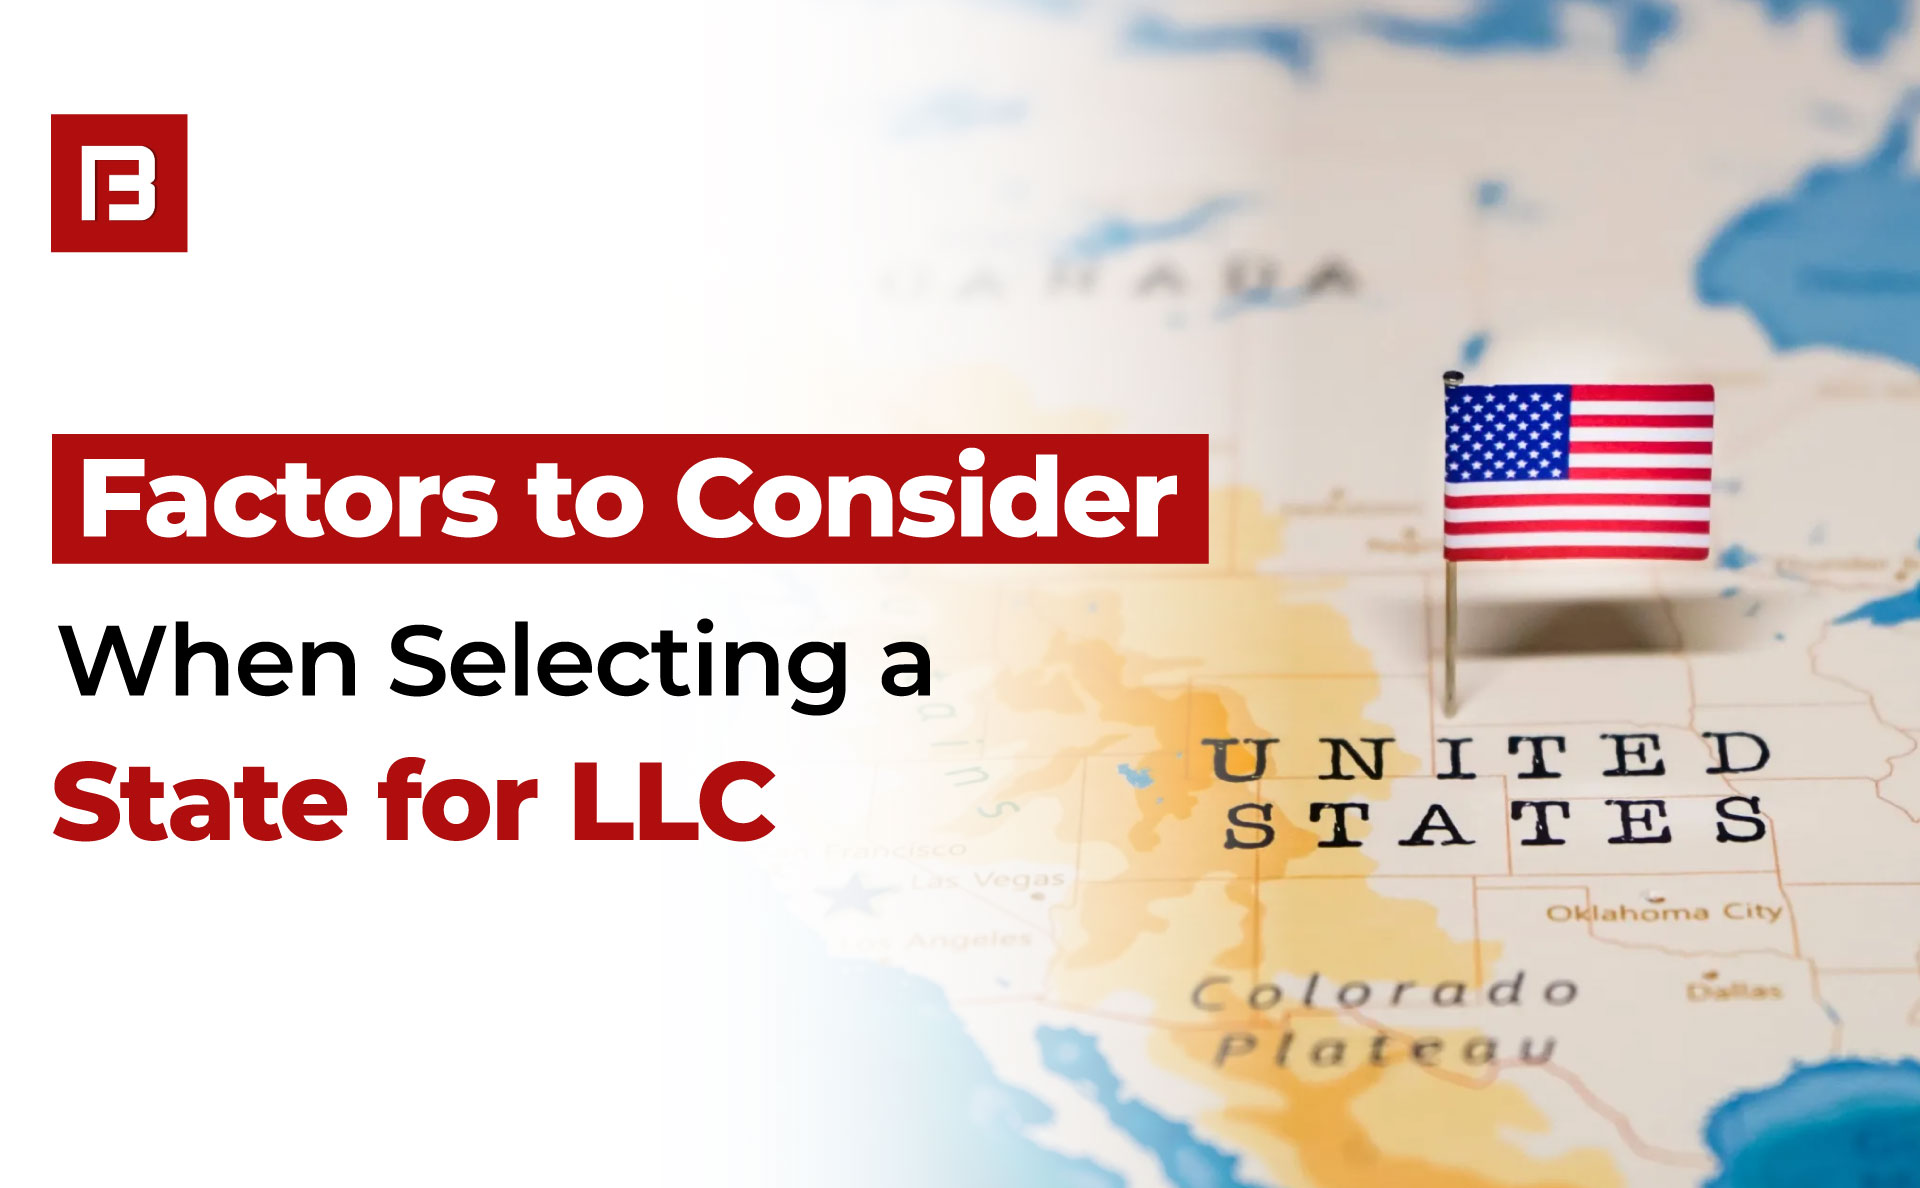 Some Key Factors to Consider When Selecting a State for Your LLC